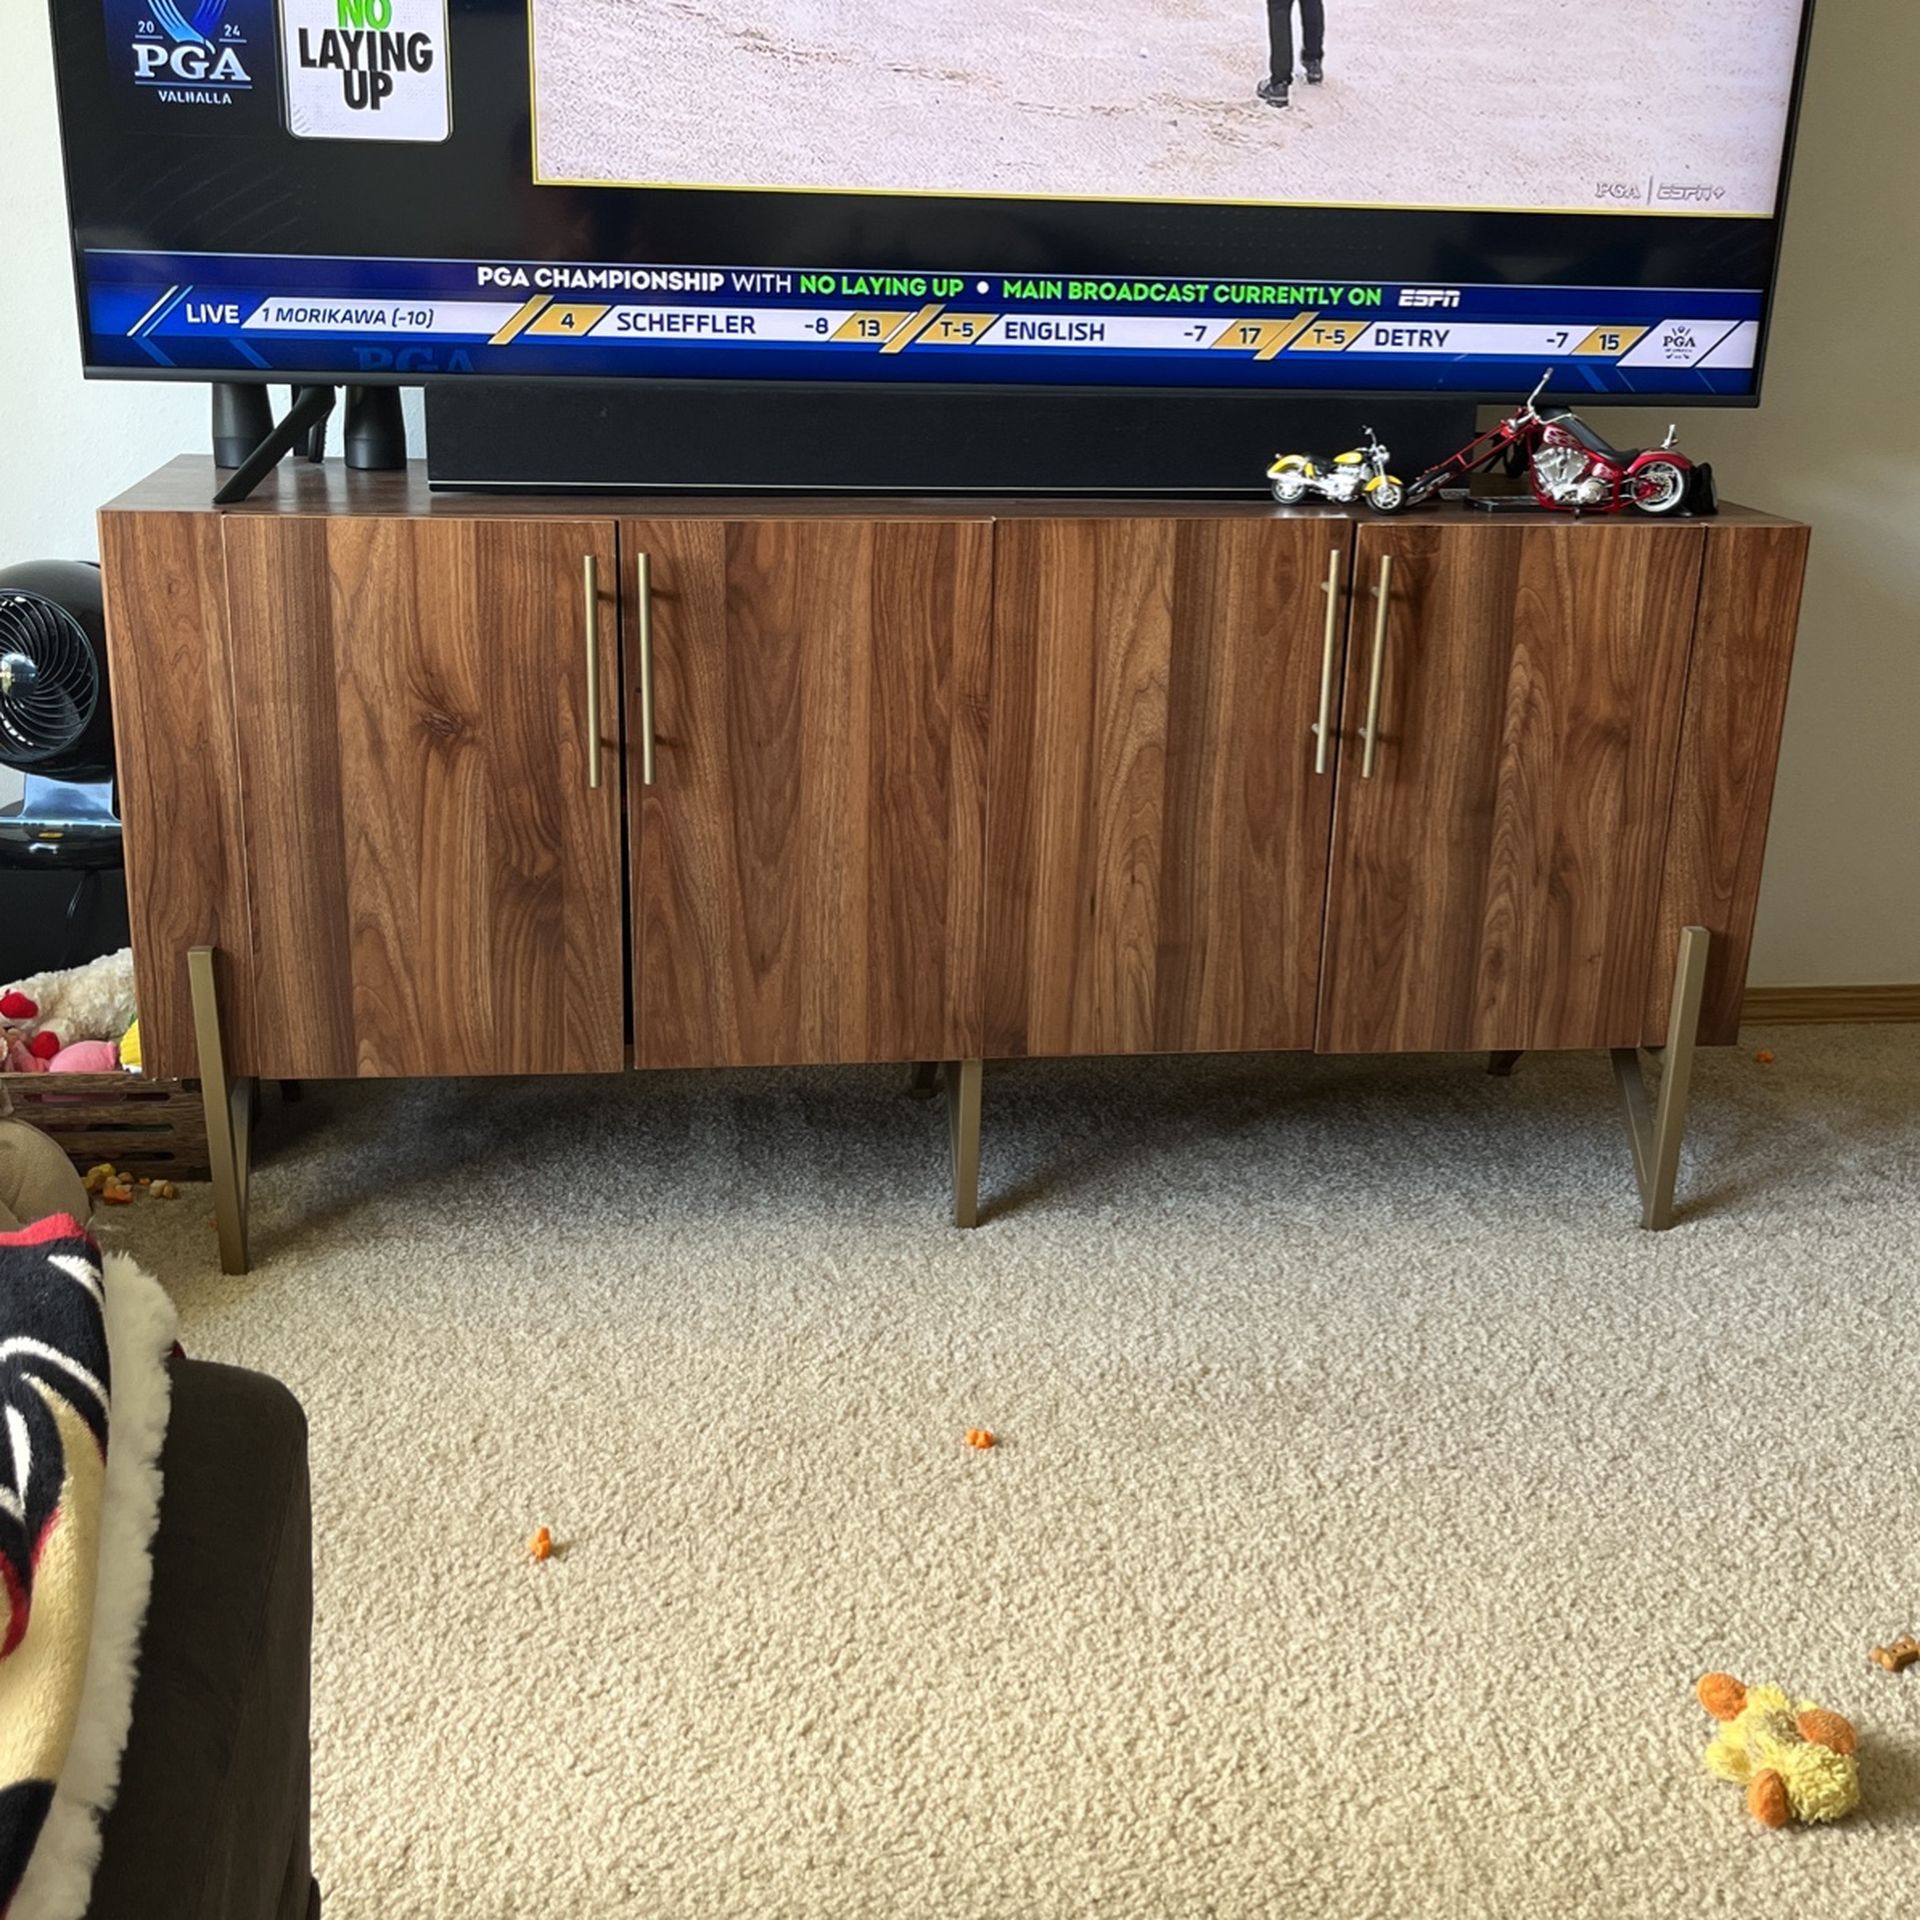 Tv Stand Cabinet